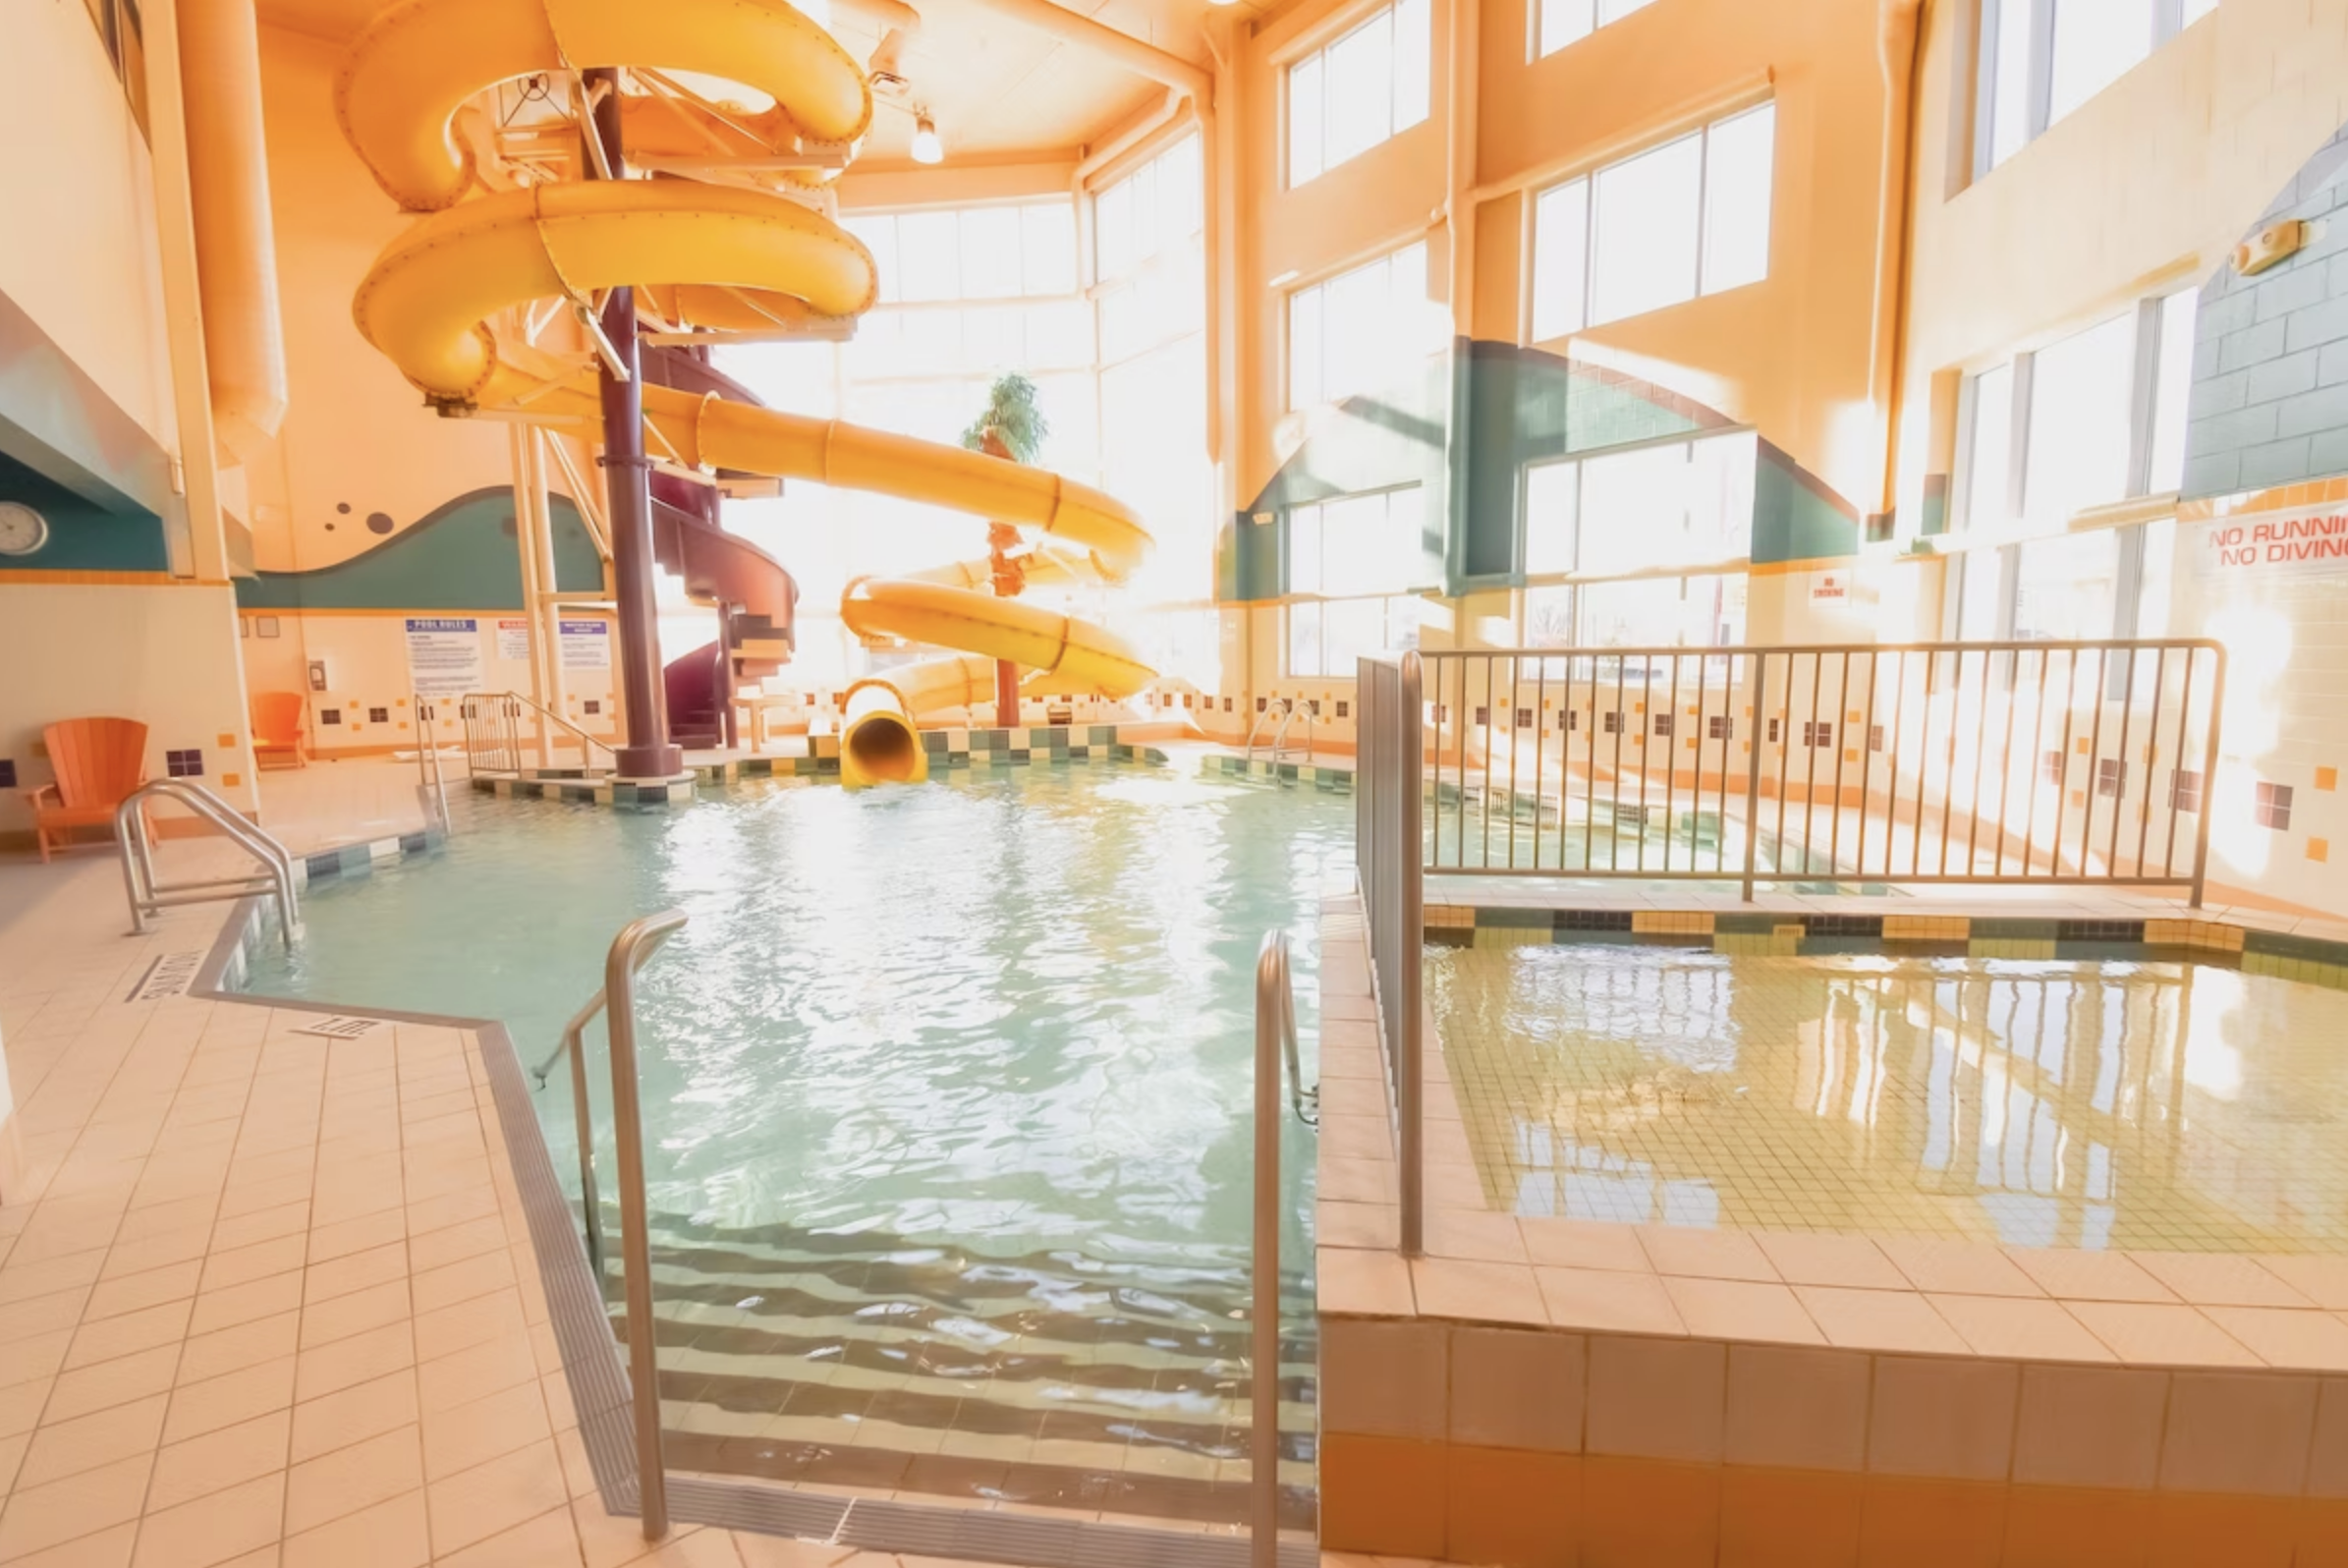 Canad Inns Destination Centre Polo Park Pool with Waterslide